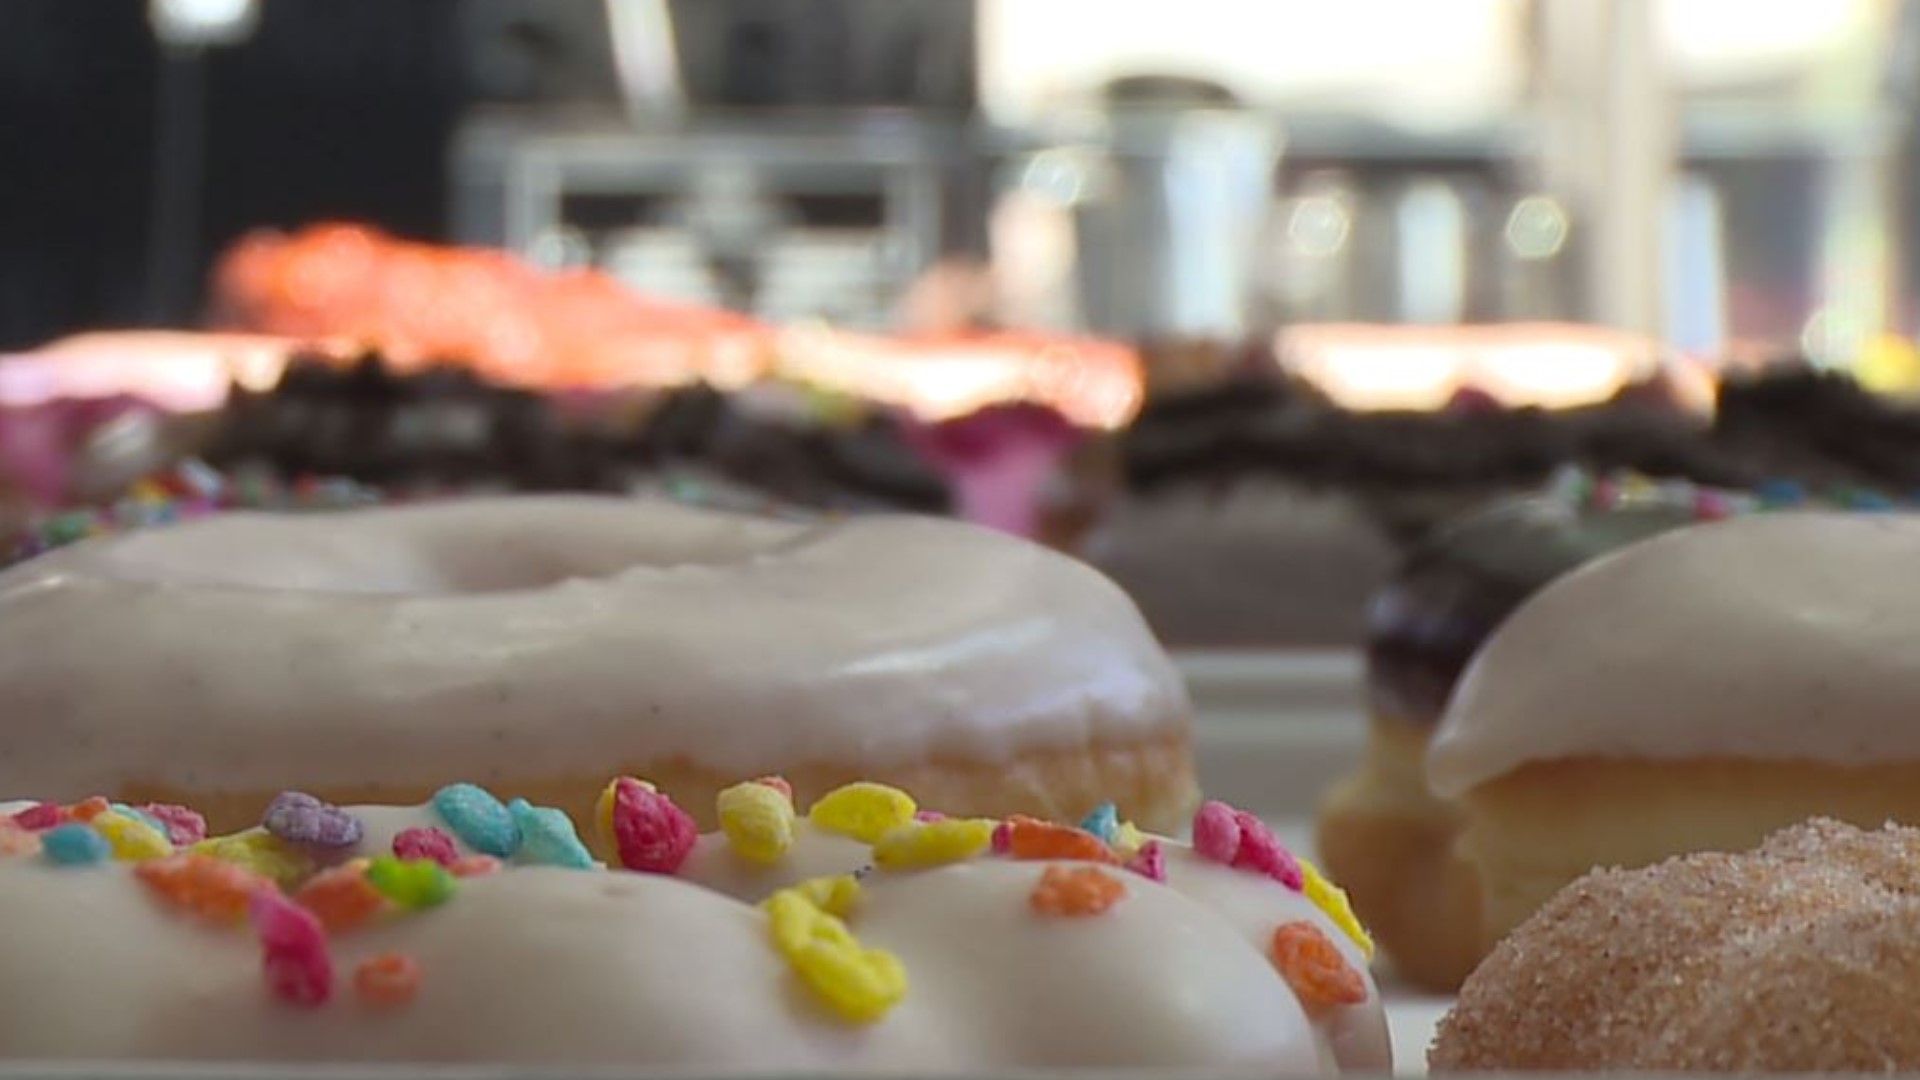 Mochi Donut Factory is a colorful addition to the doughnut scene